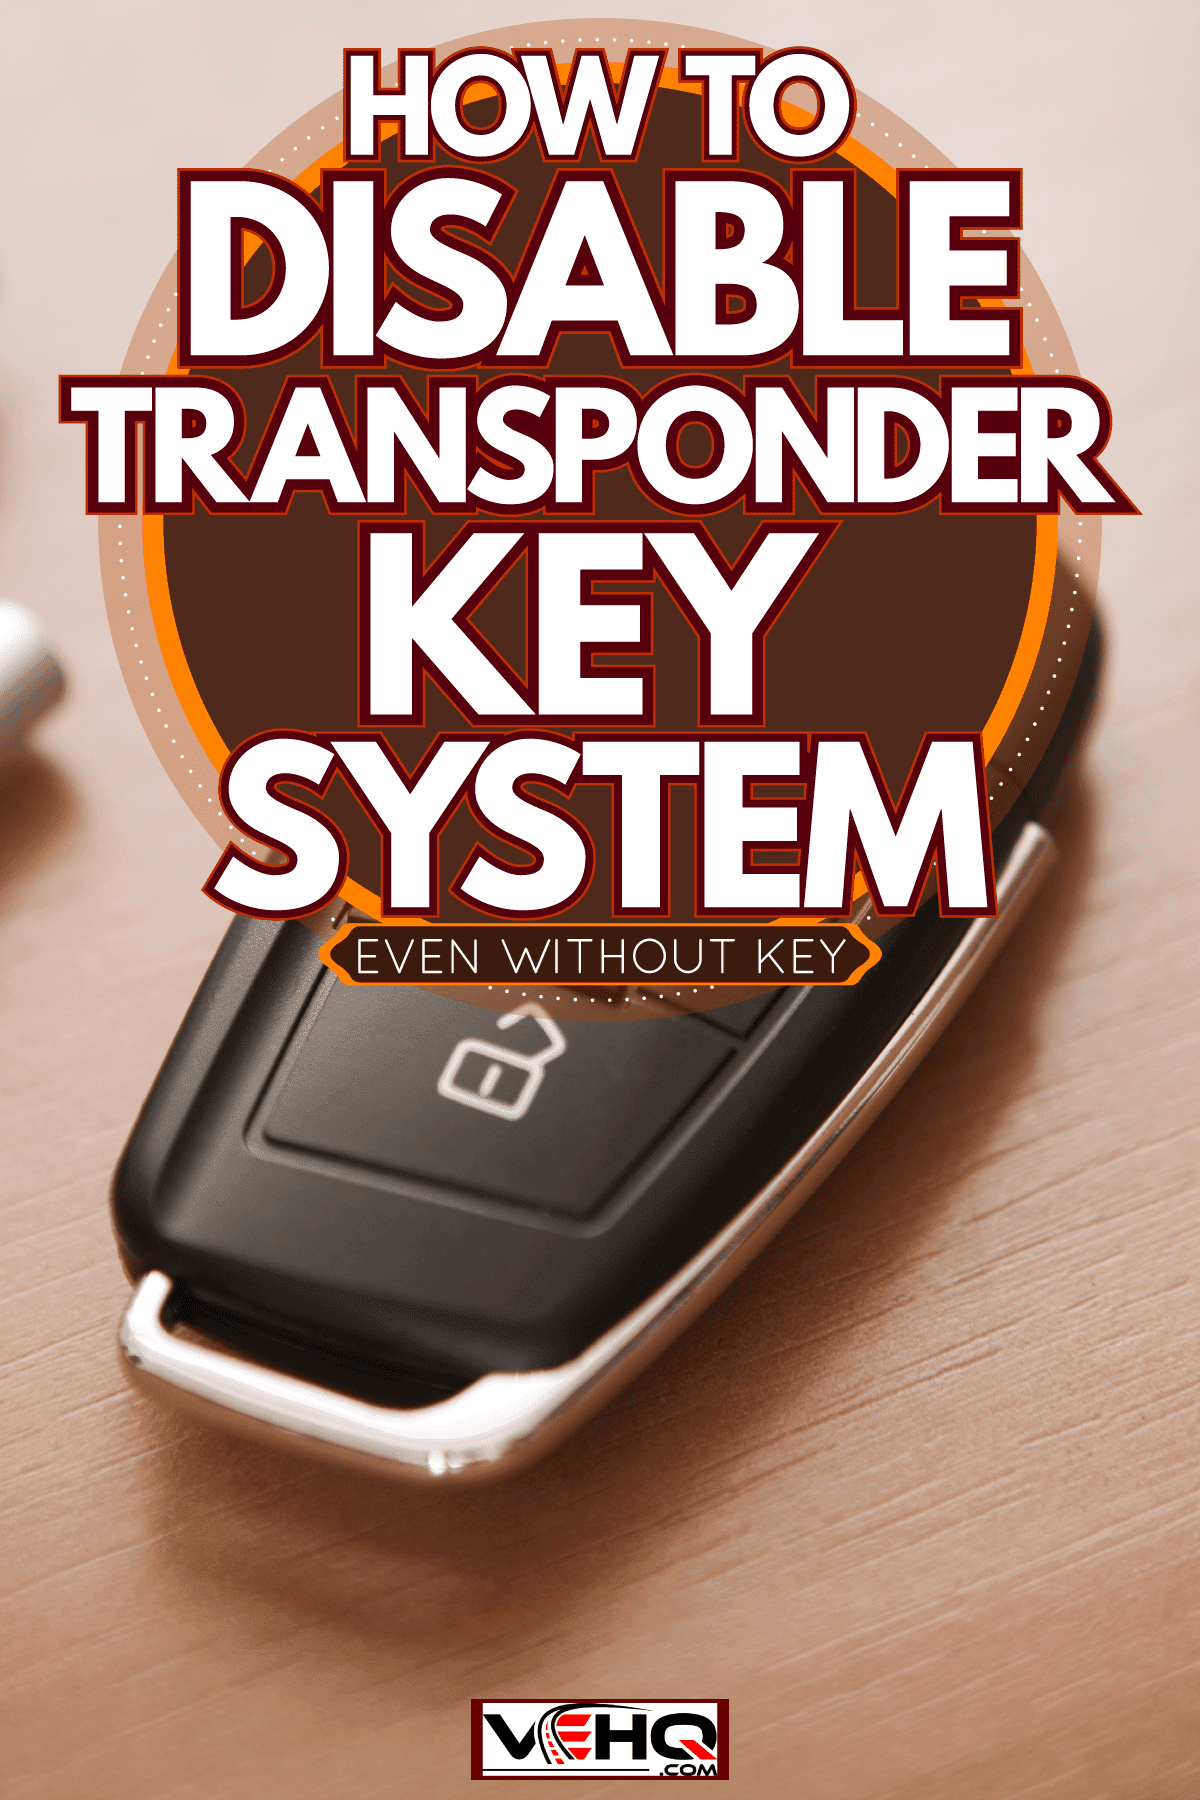 A car key left on the table, How To Disable Transponder Key System [Even Without Key]